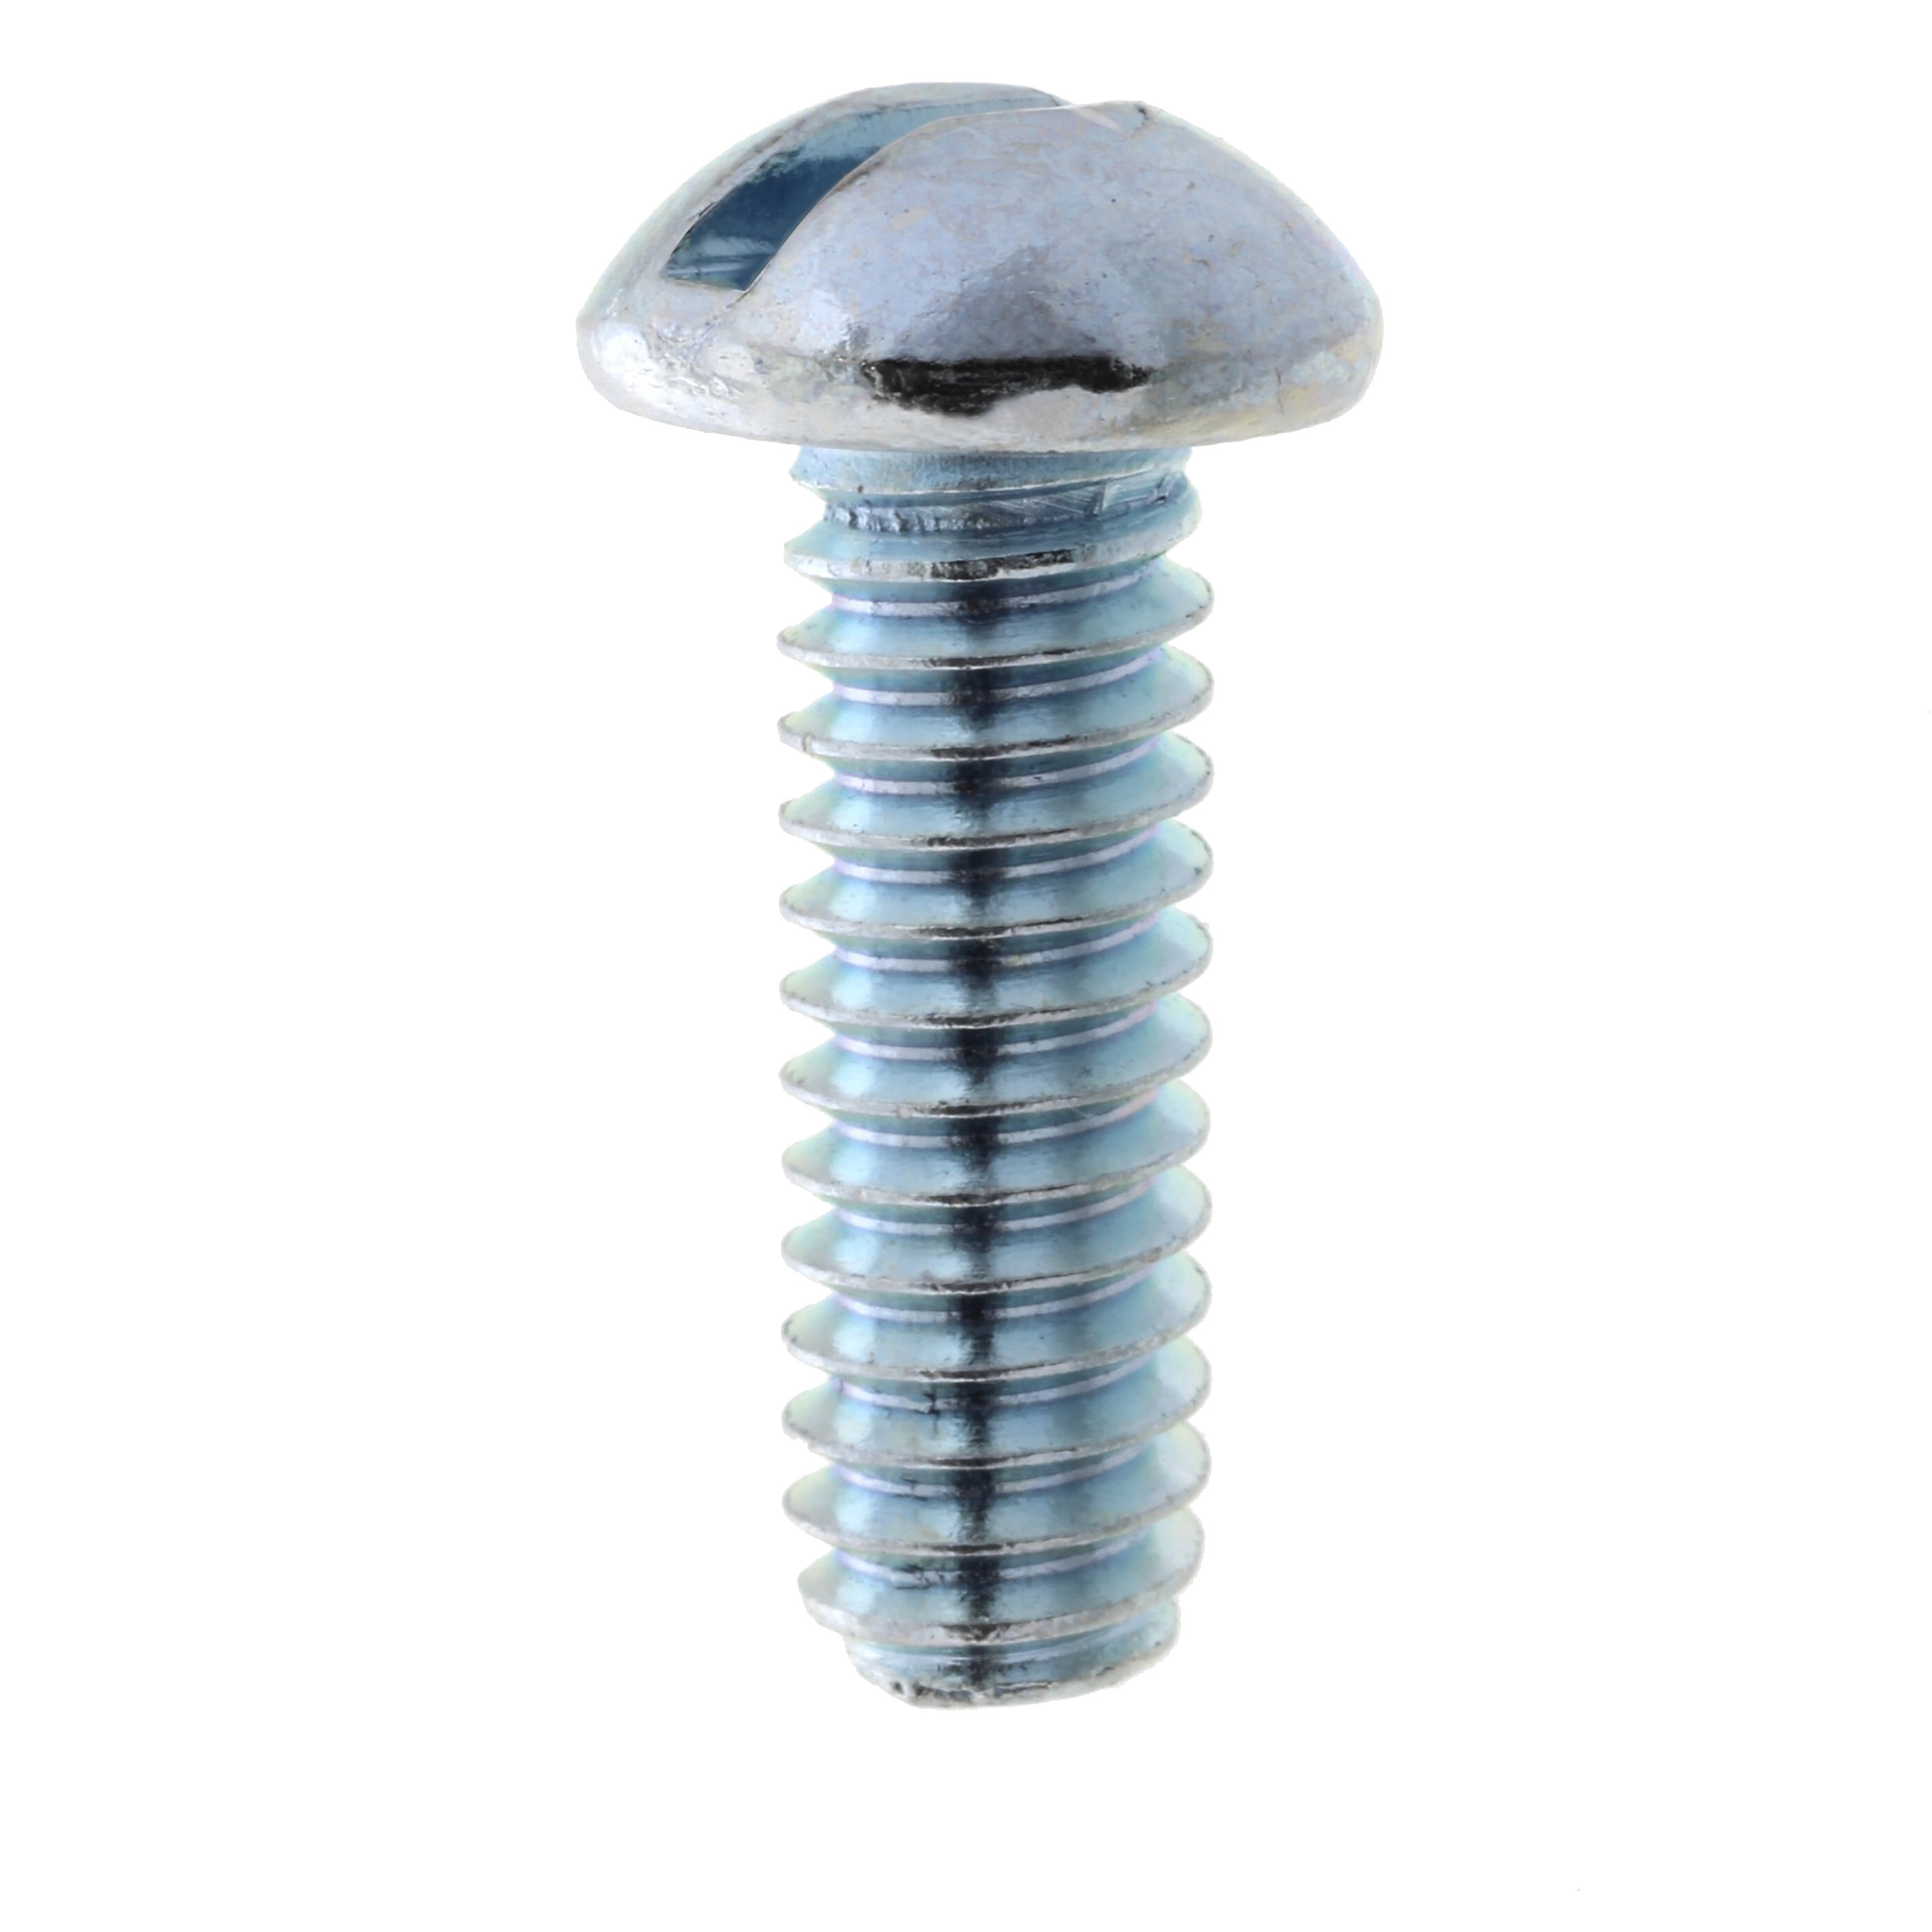 1/4 Length #6-32 Thread Size Slotted Drive Fully Threaded Pack of 25 USA Made Polycarbonate Pan Head Machine Screw 